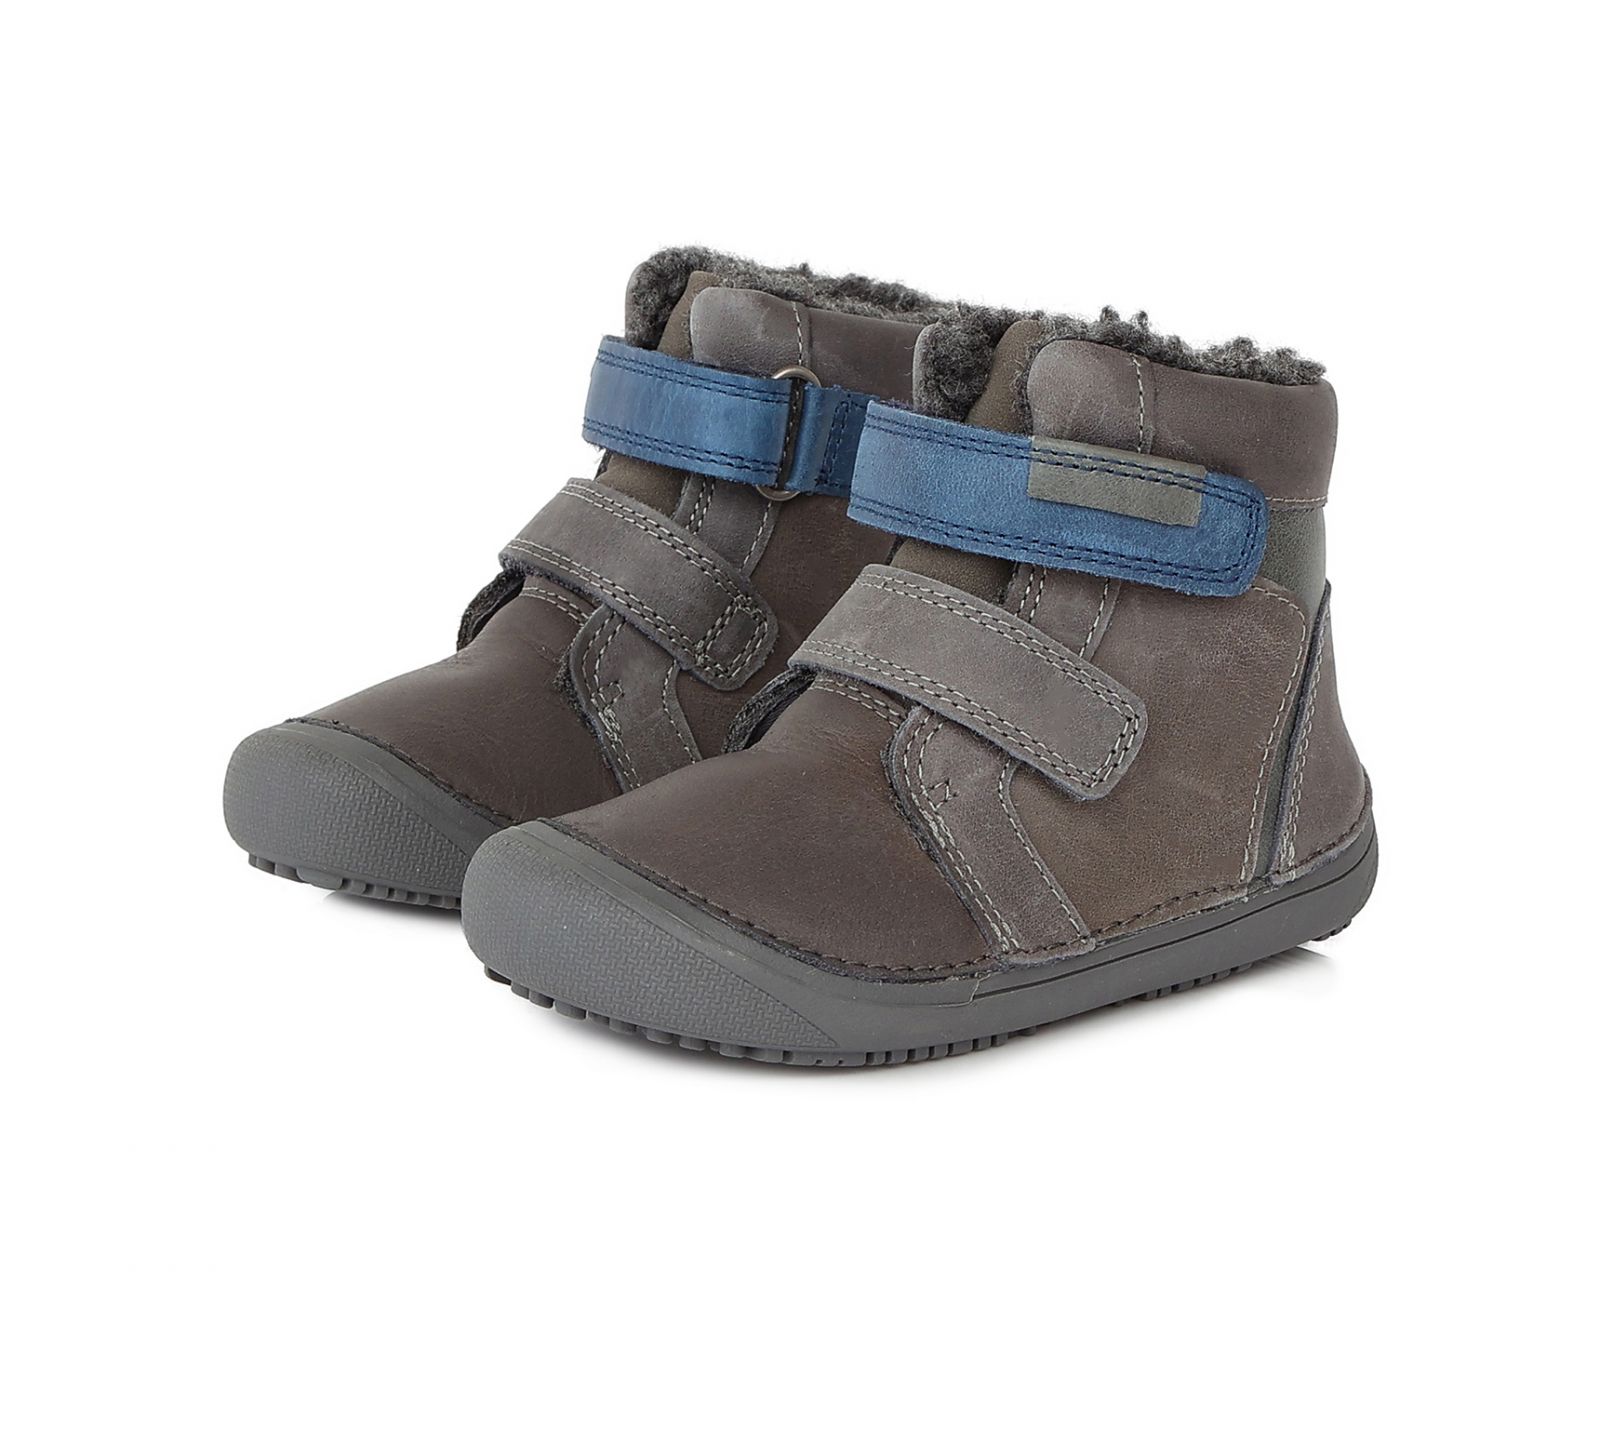 Barefoot DDstep 063 winter boots - gray